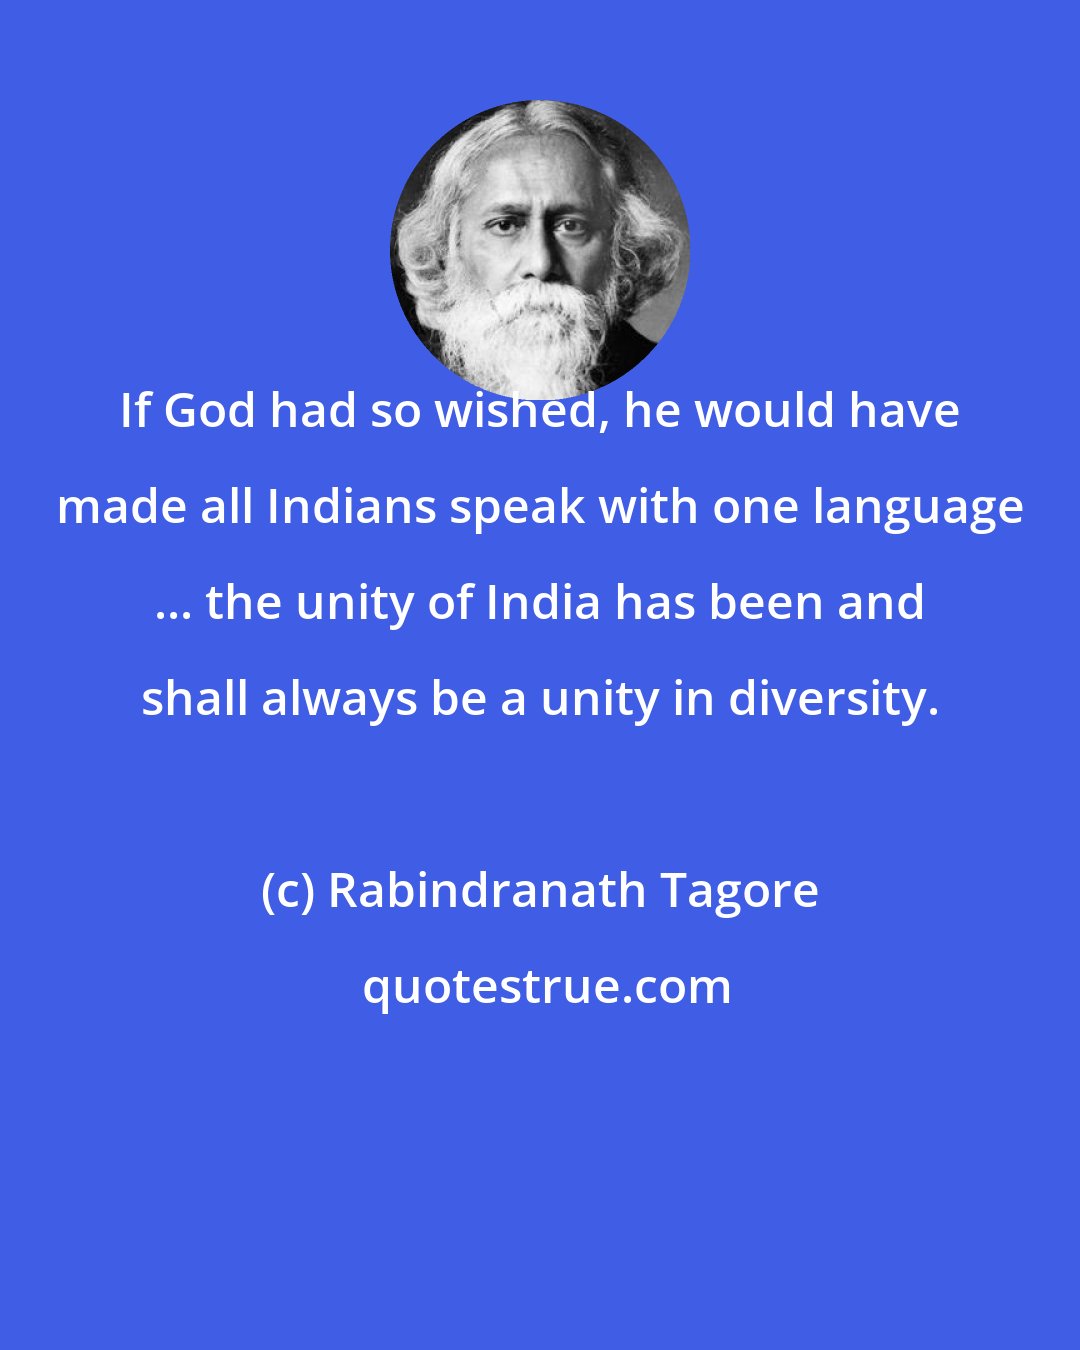 Rabindranath Tagore: If God had so wished, he would have made all Indians speak with one language ... the unity of India has been and shall always be a unity in diversity.